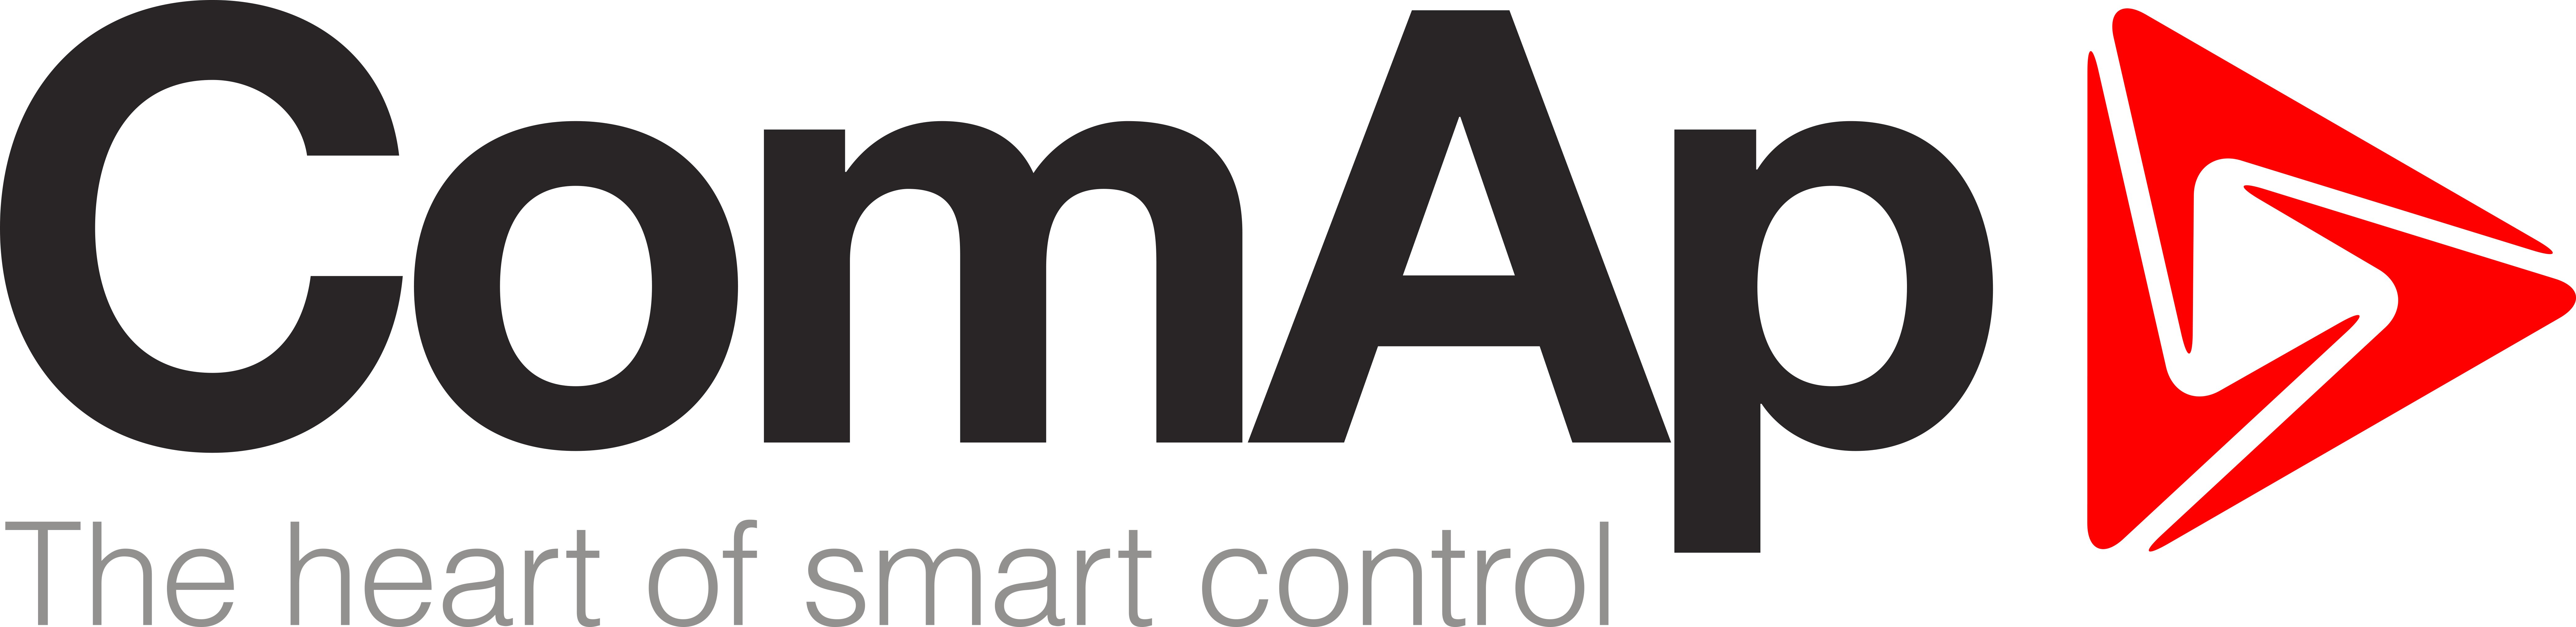  COMAP THE HEART OF SMART CONTROL